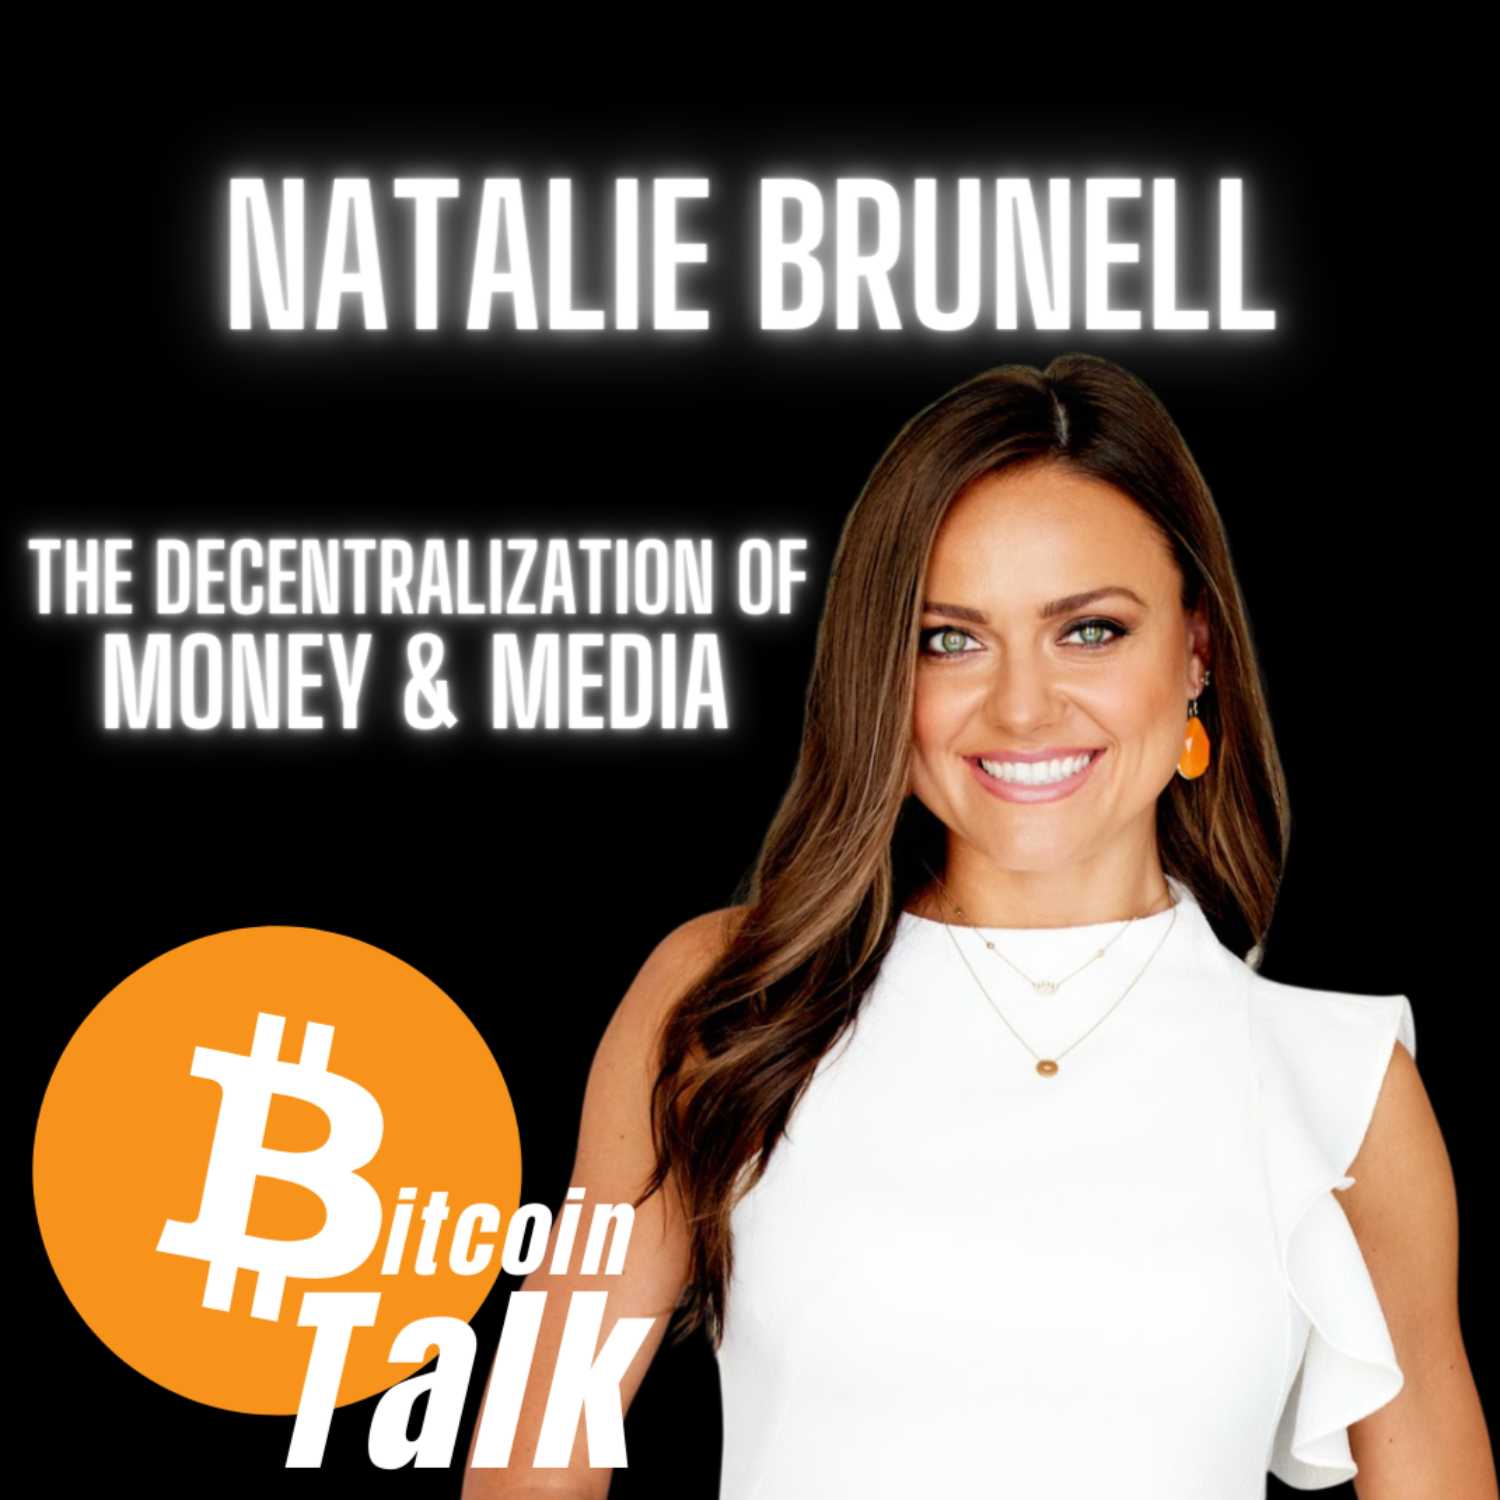 The Decentralization of Money & Media (Bitcoin Talk with Natalie Brunell)